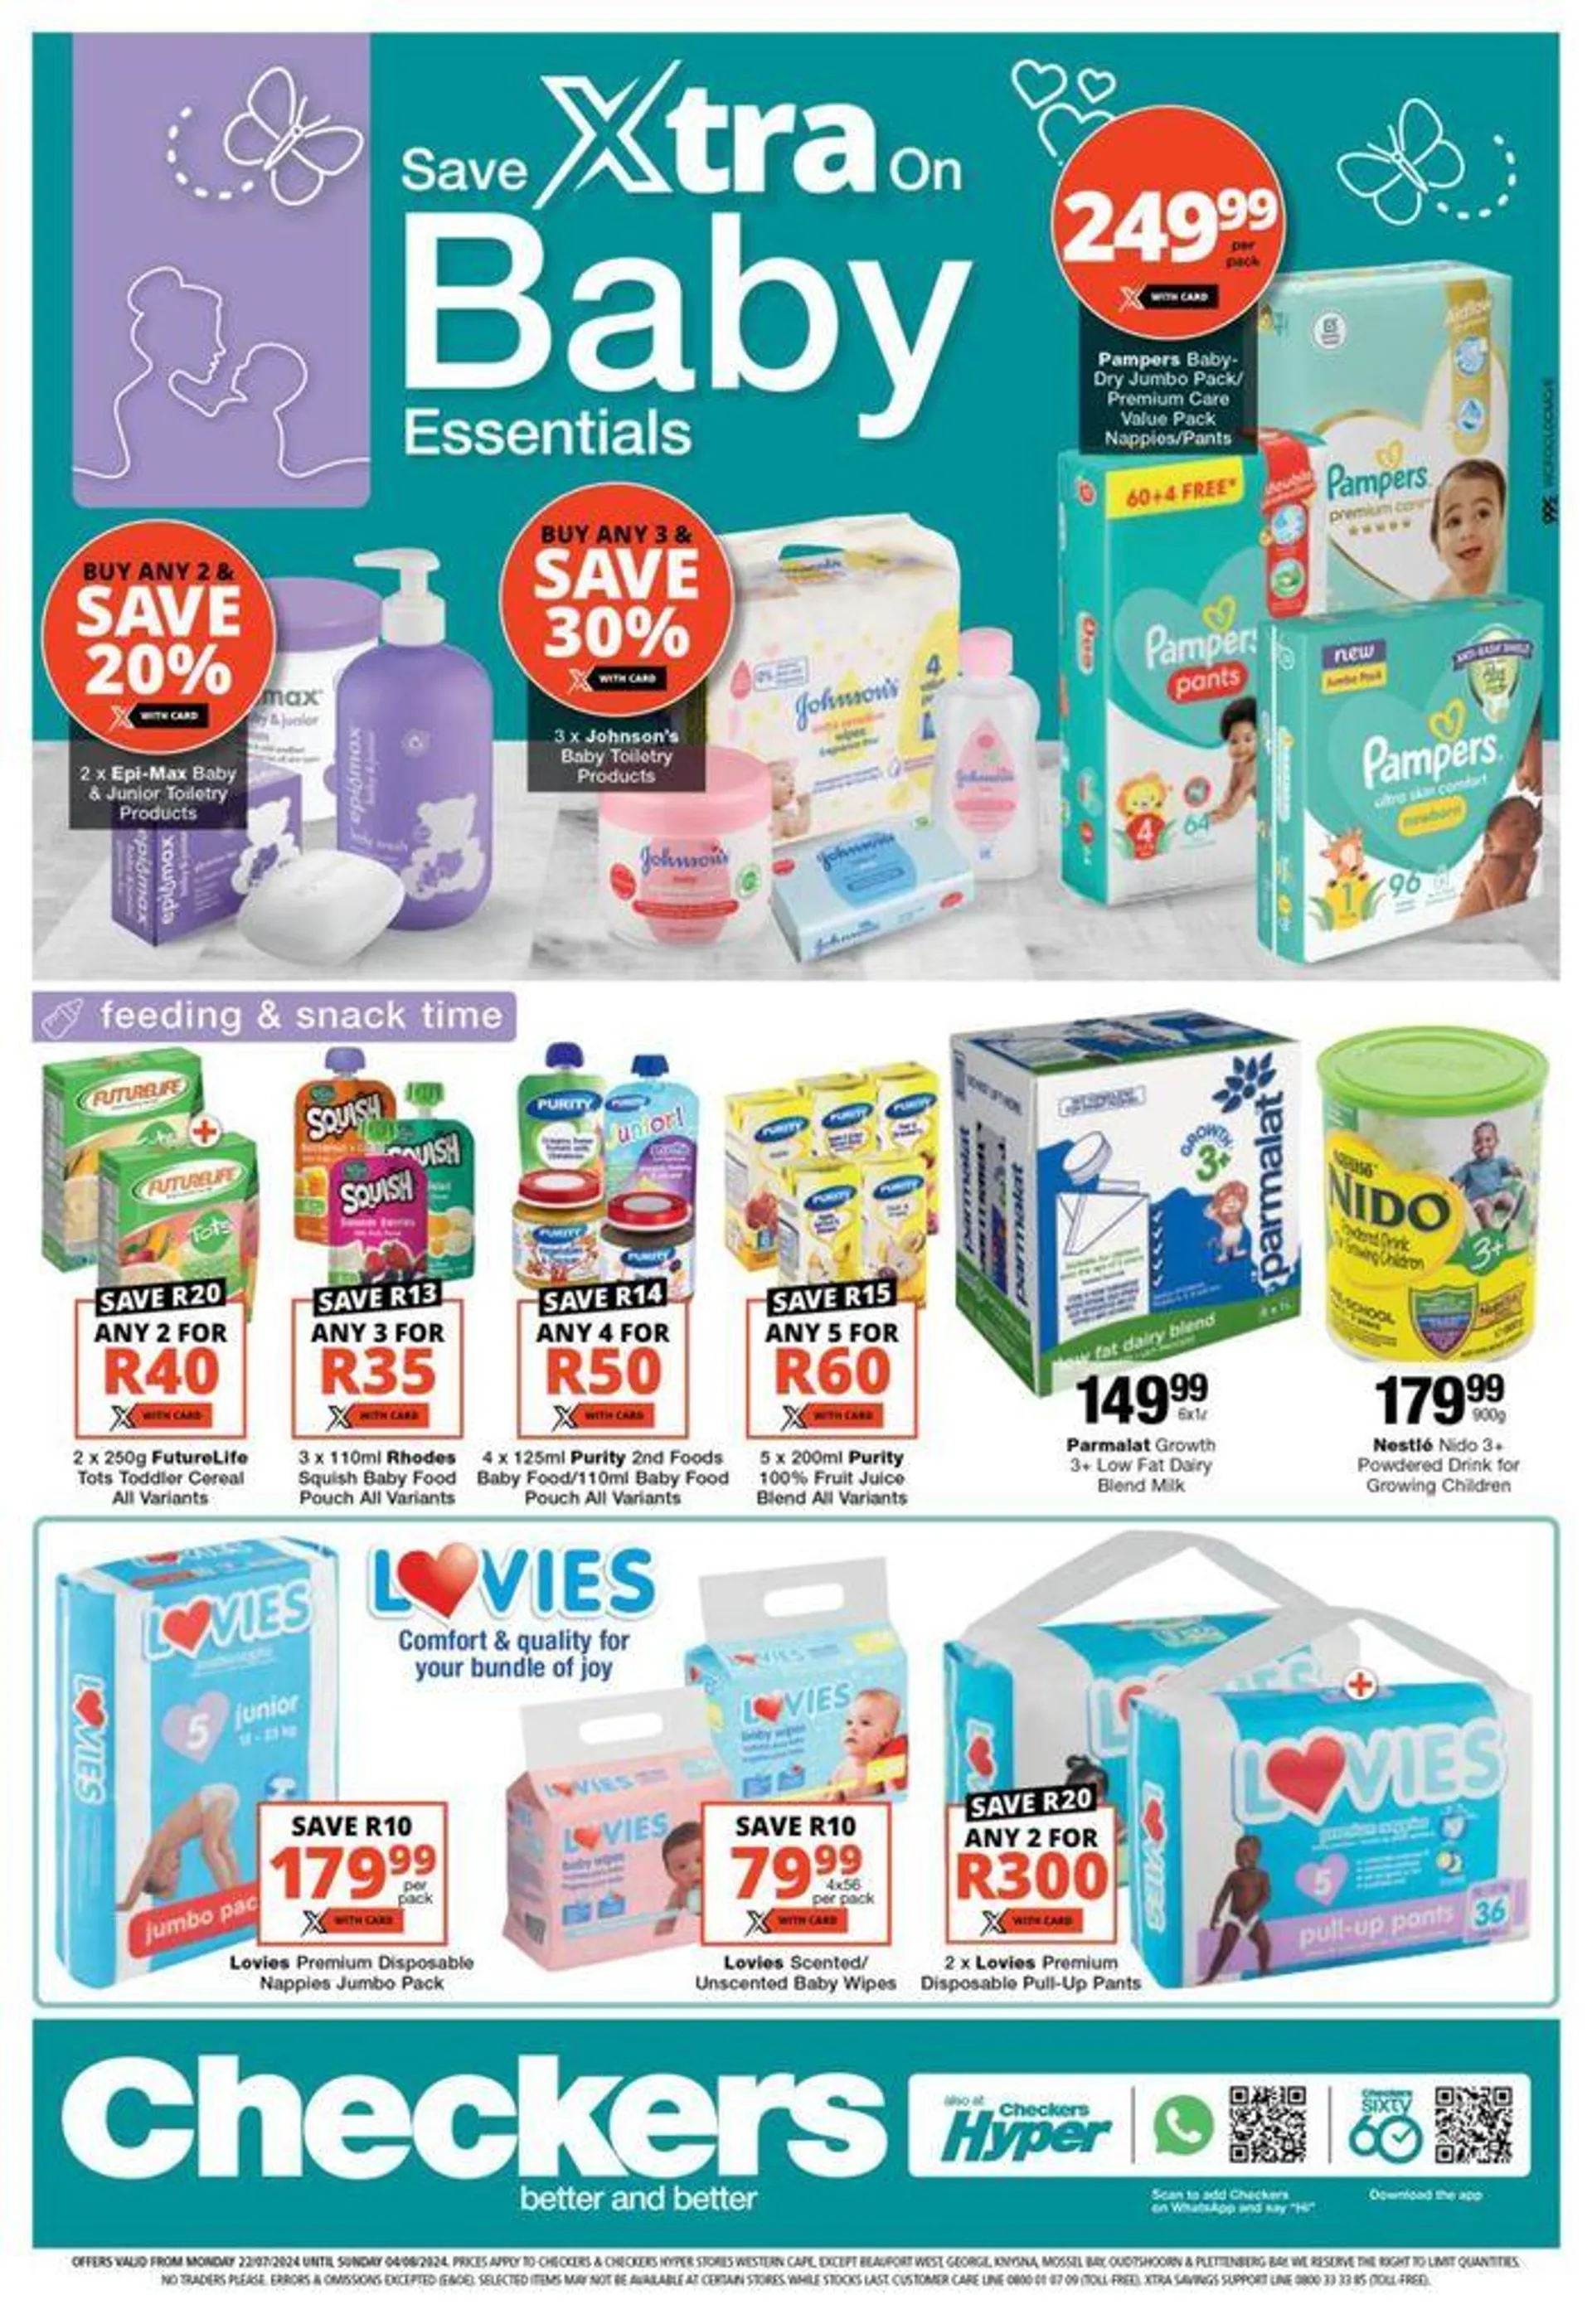 Checkers Baby Promotion  - 1